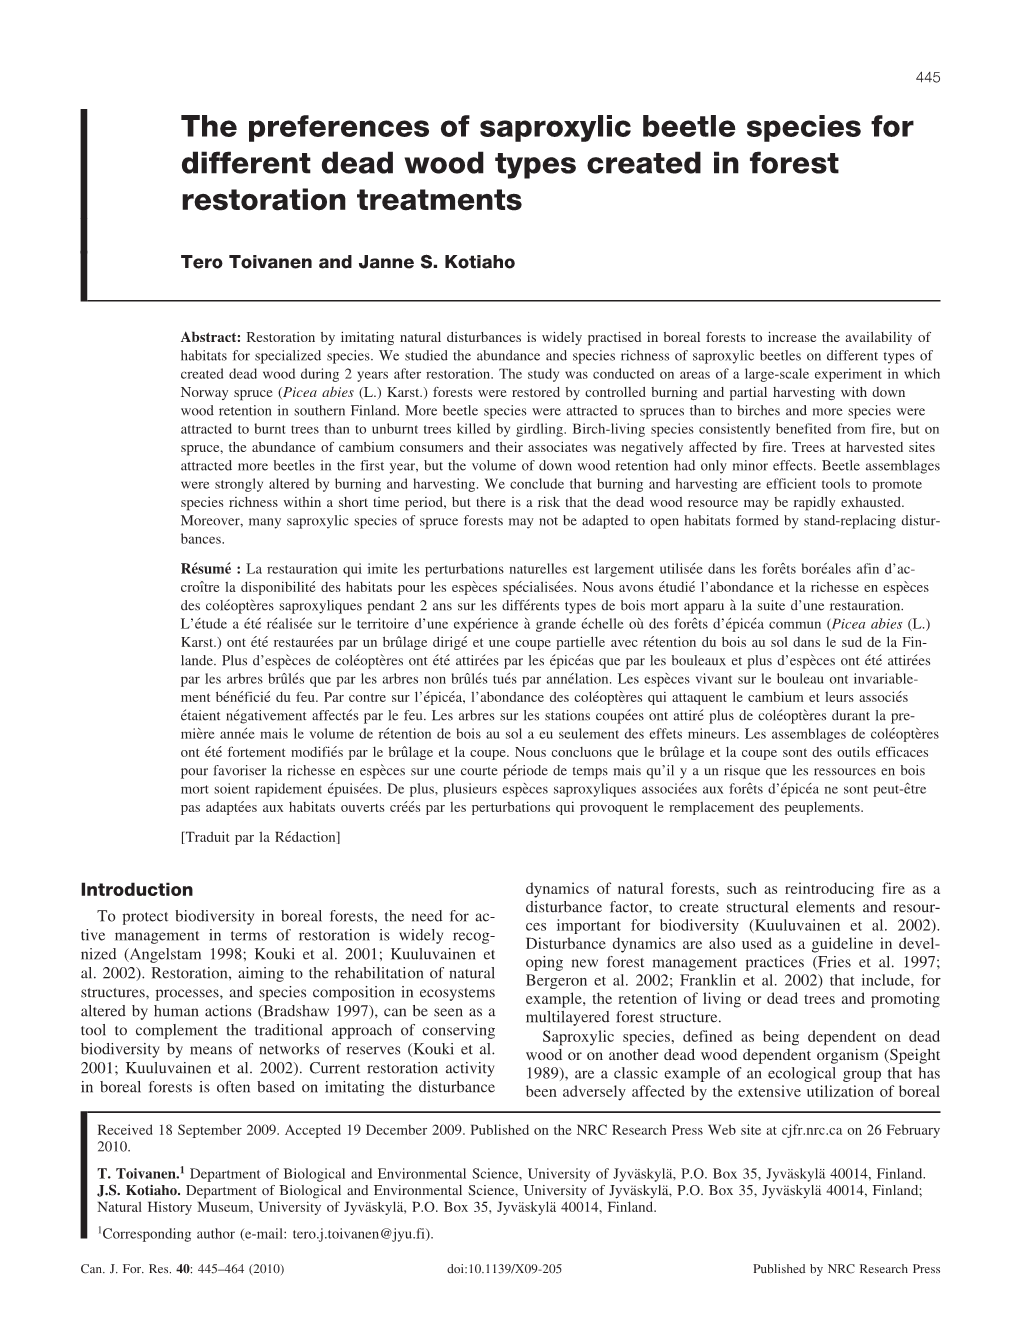 The Preferences of Saproxylic Beetle Species for Different Dead Wood Types Created in Forest Restoration Treatments